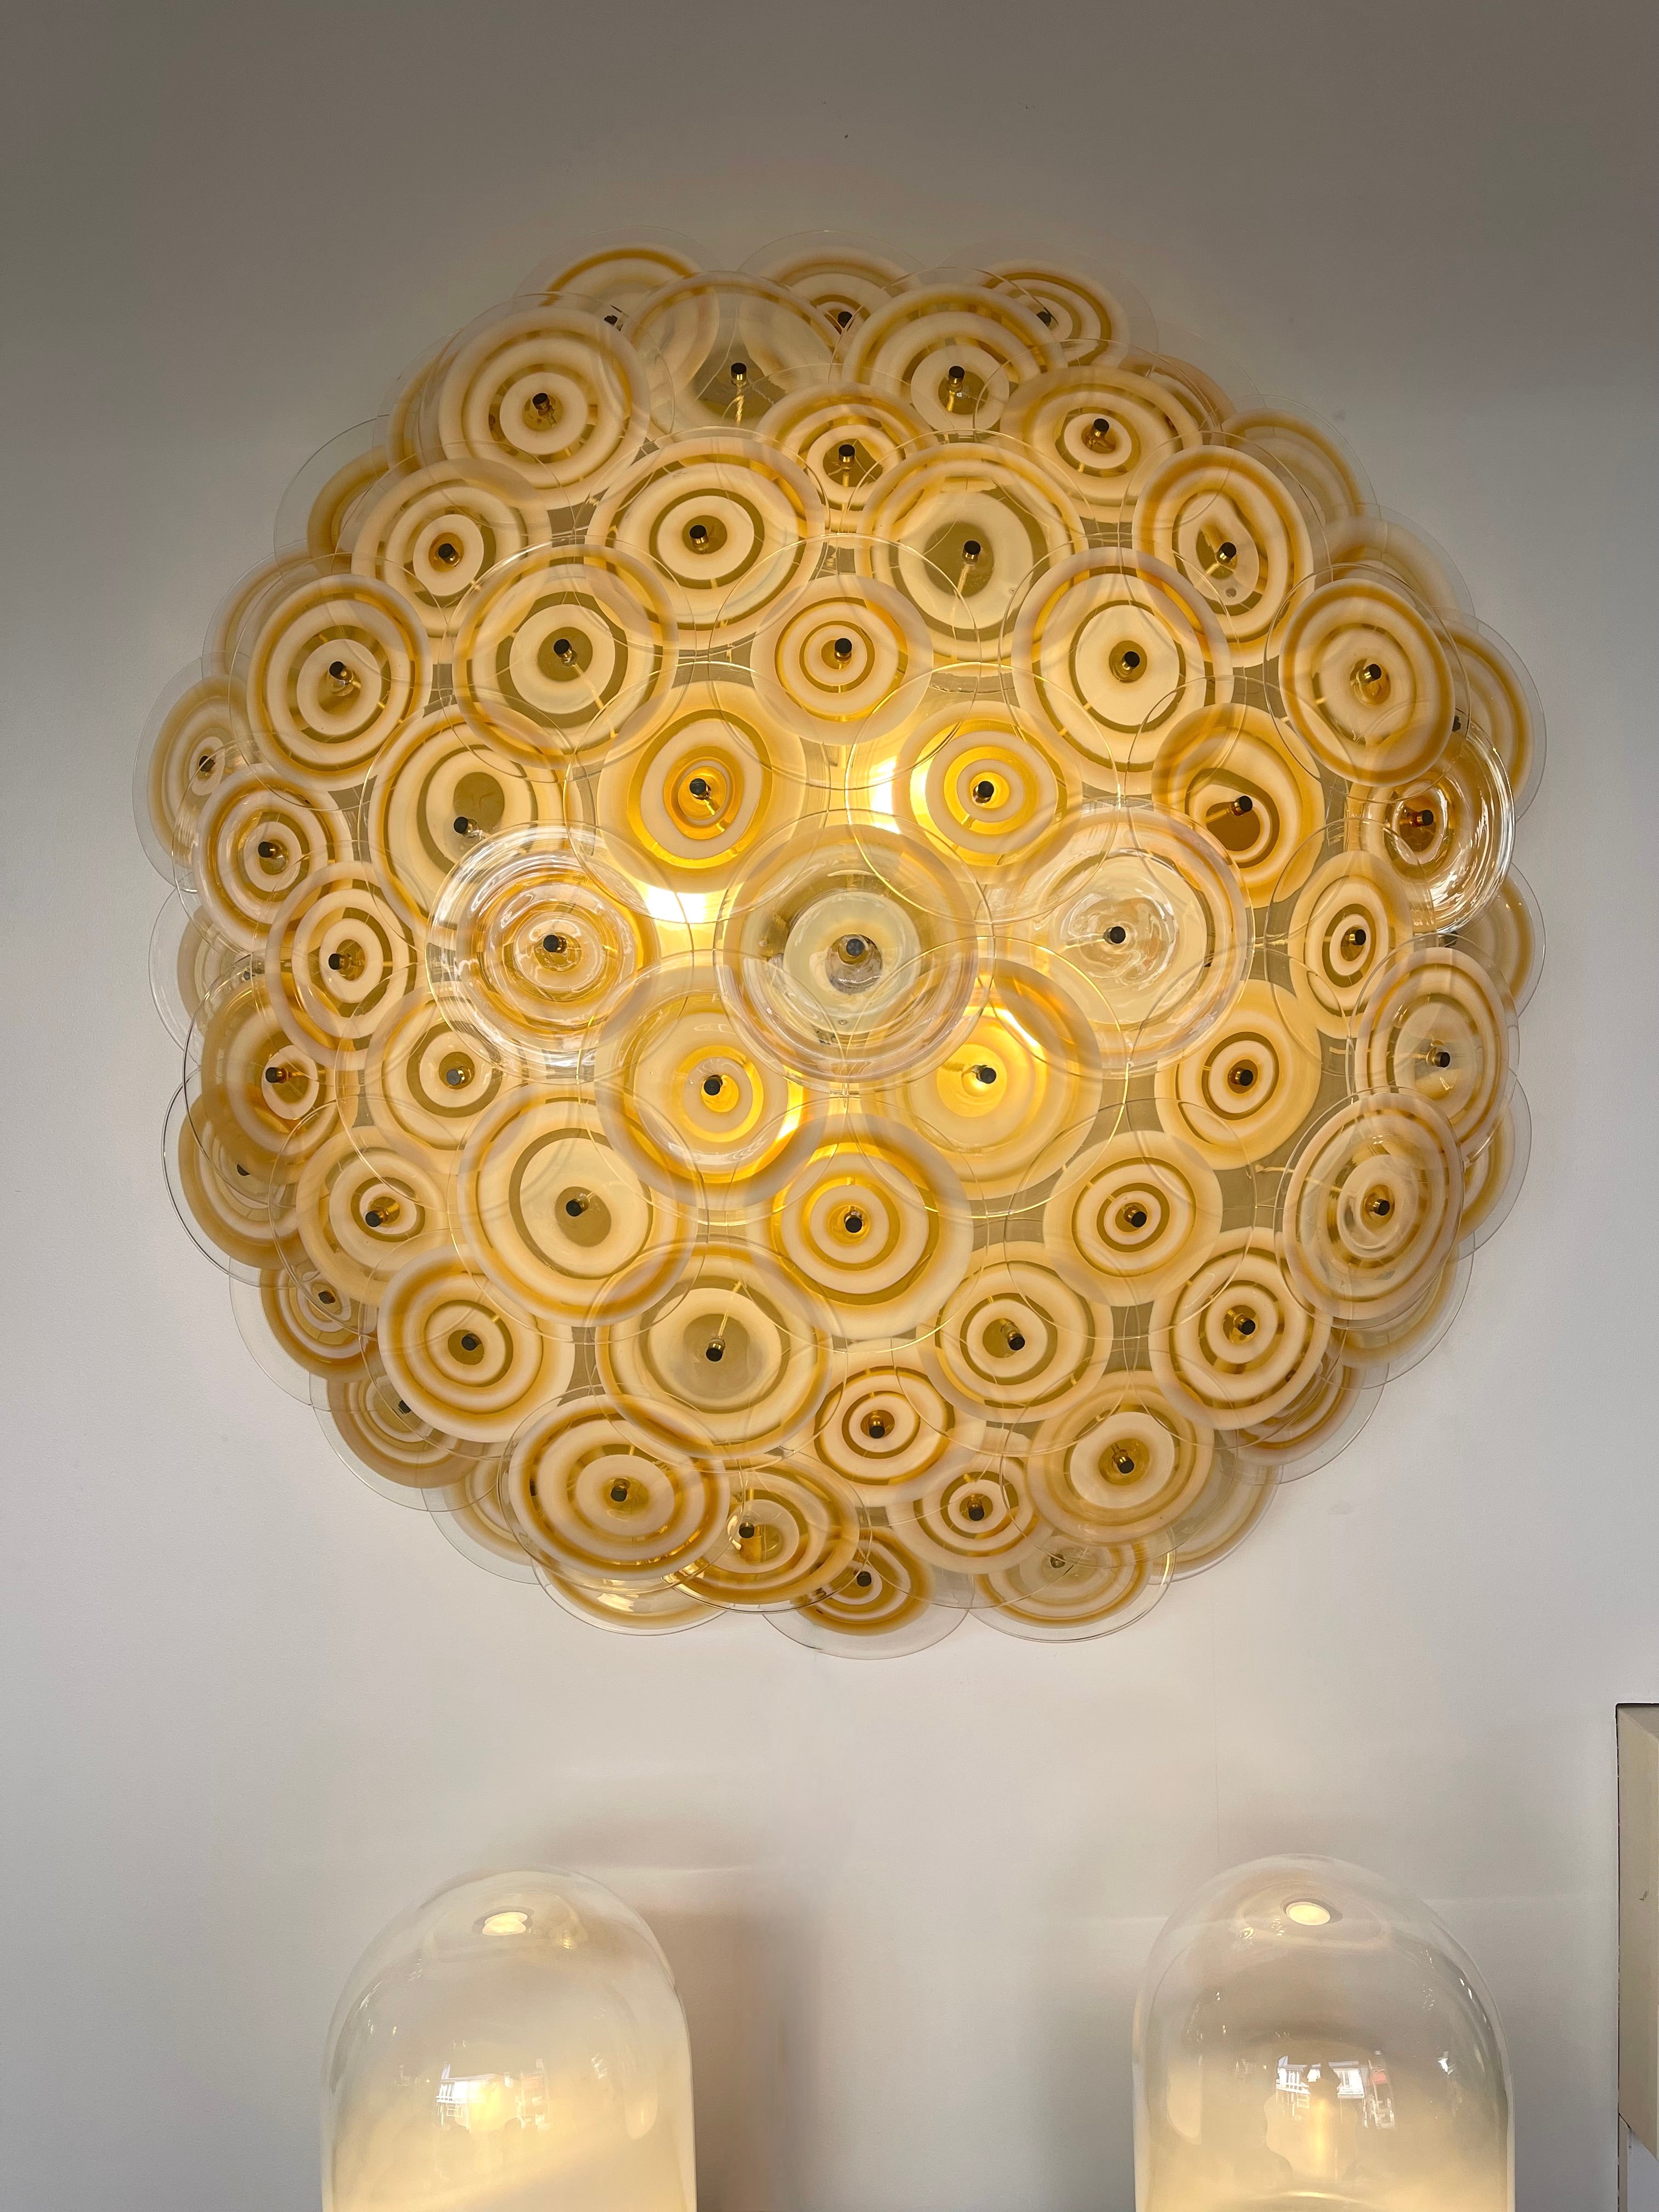 Very rare oversize large sun wall light lamp pannel sconce in white lacquered metal and yellow orange murano glass disc by the italian master glass artist Gianmaria Potenza for the Murano manufacture La Murrina. He is the founder of La Murrina at